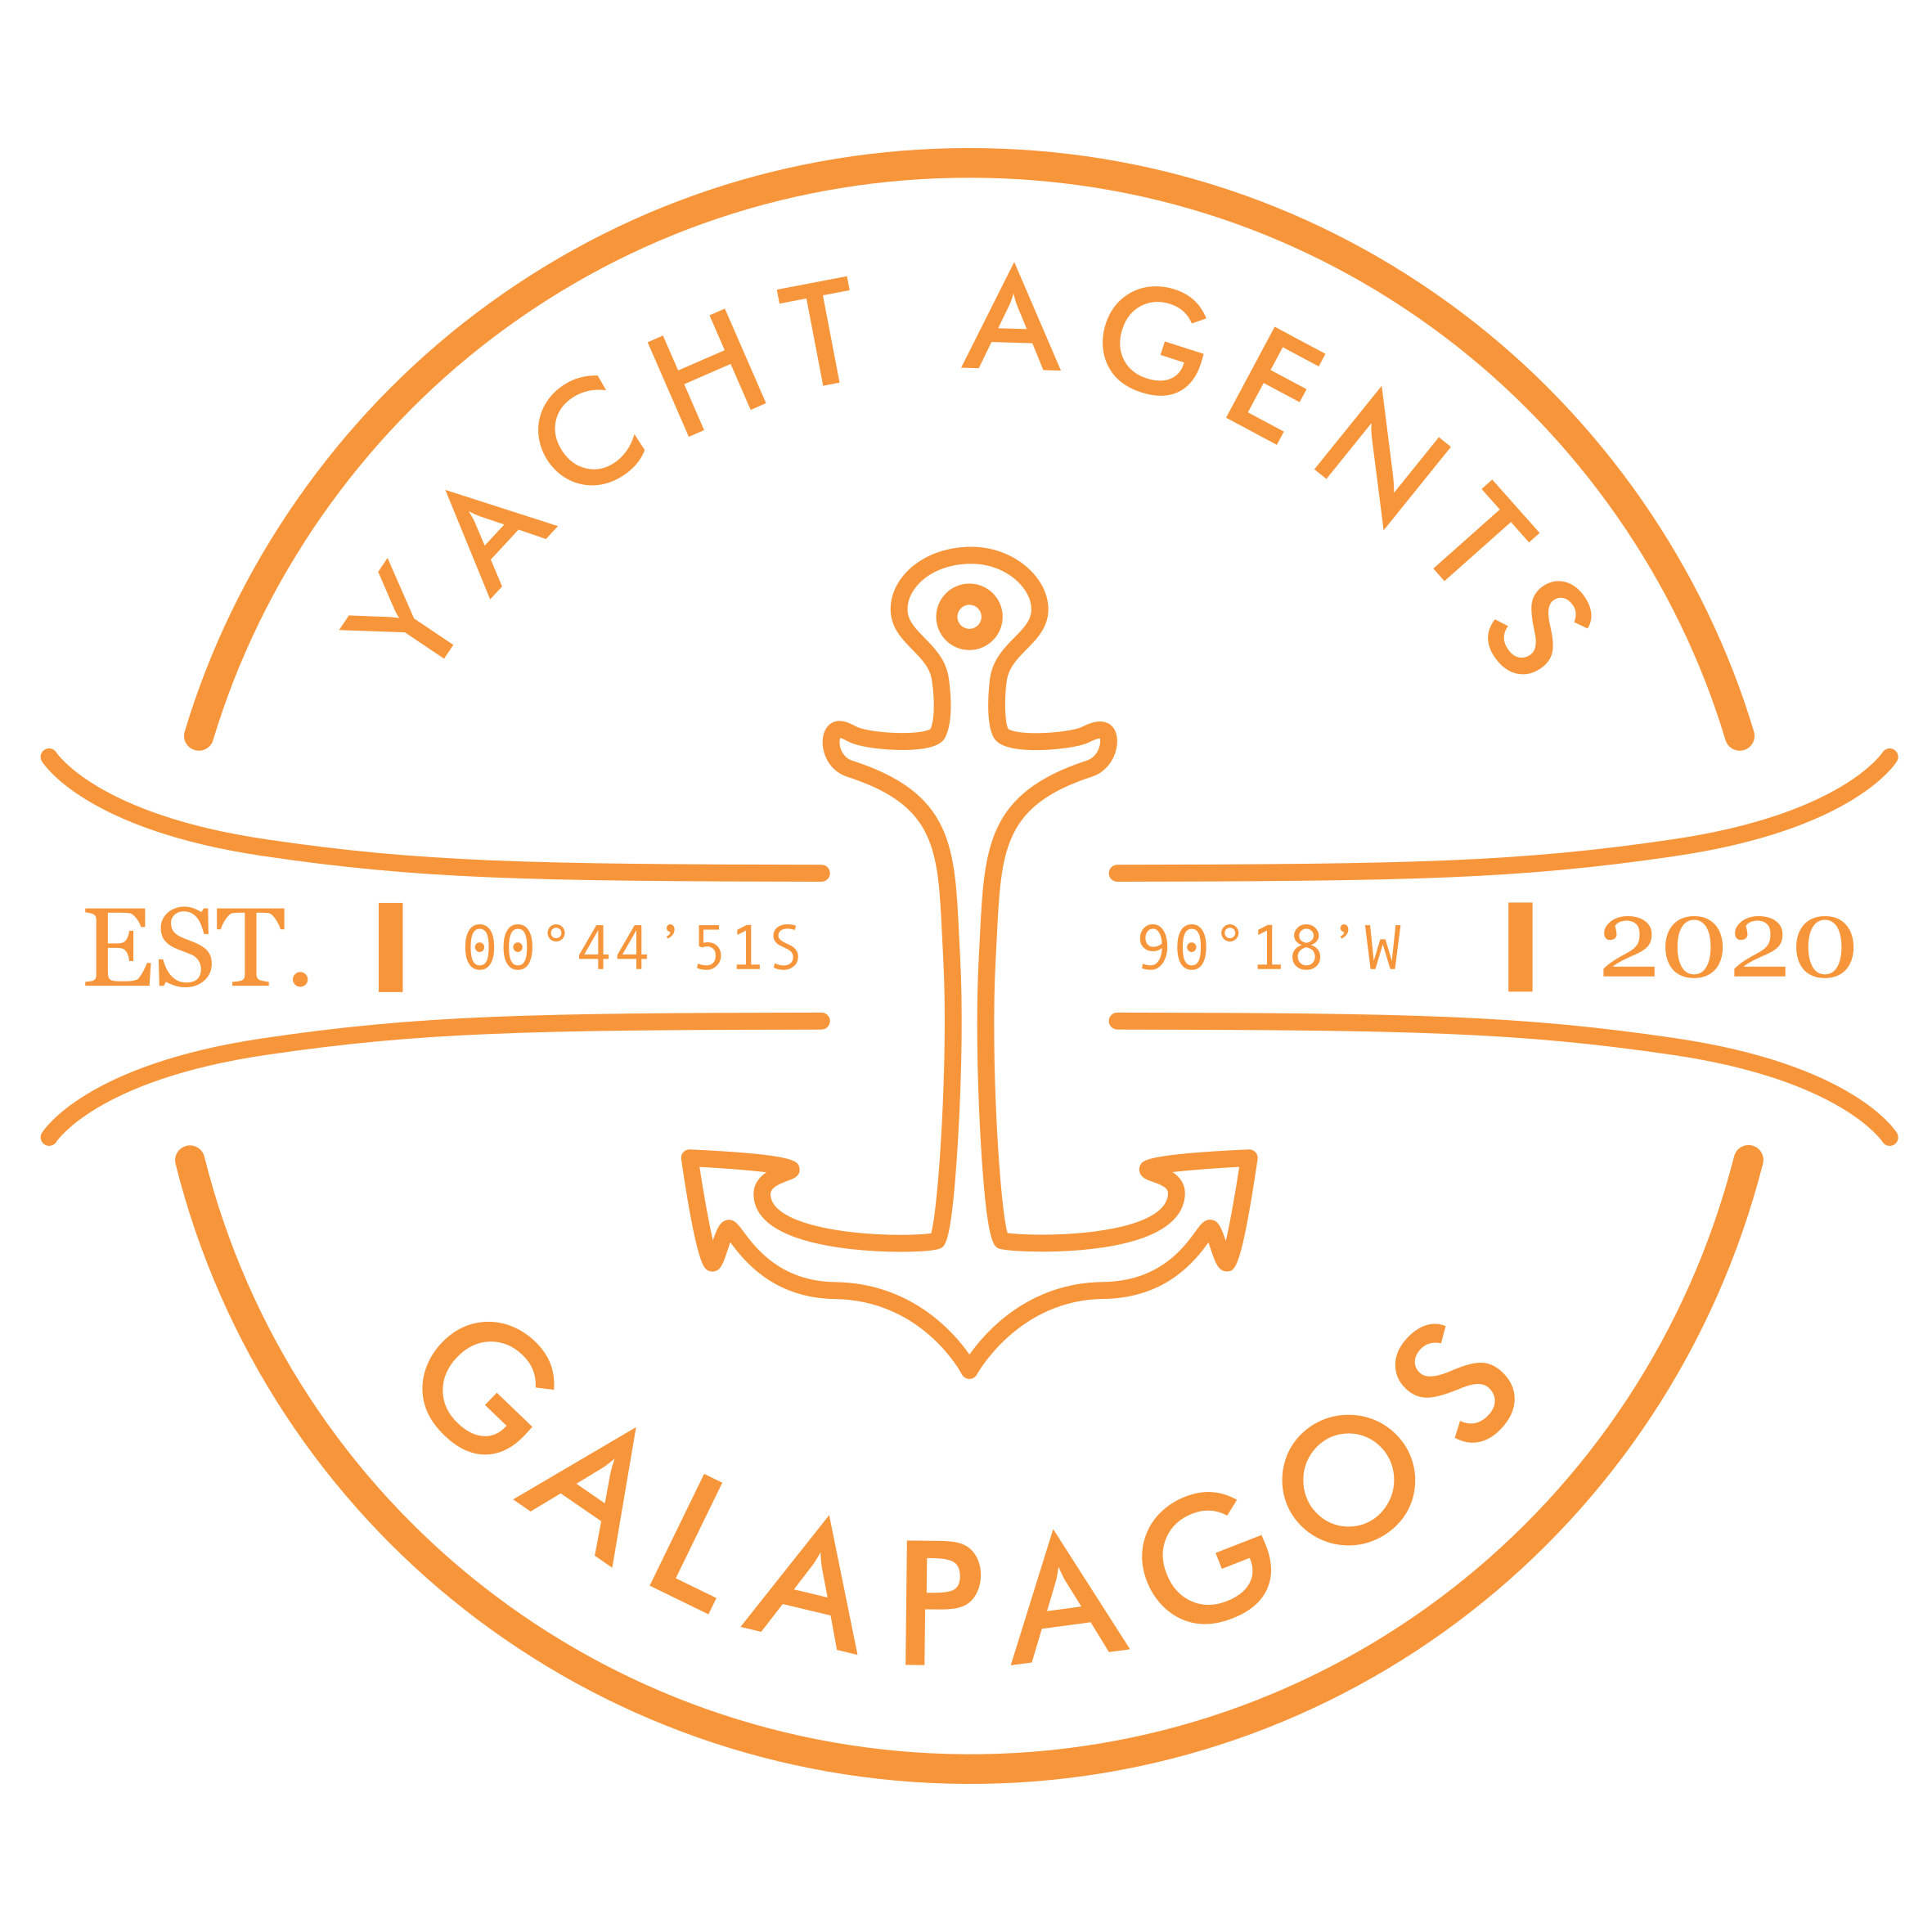 YACHT AGENTS GALAPAGOS Co.